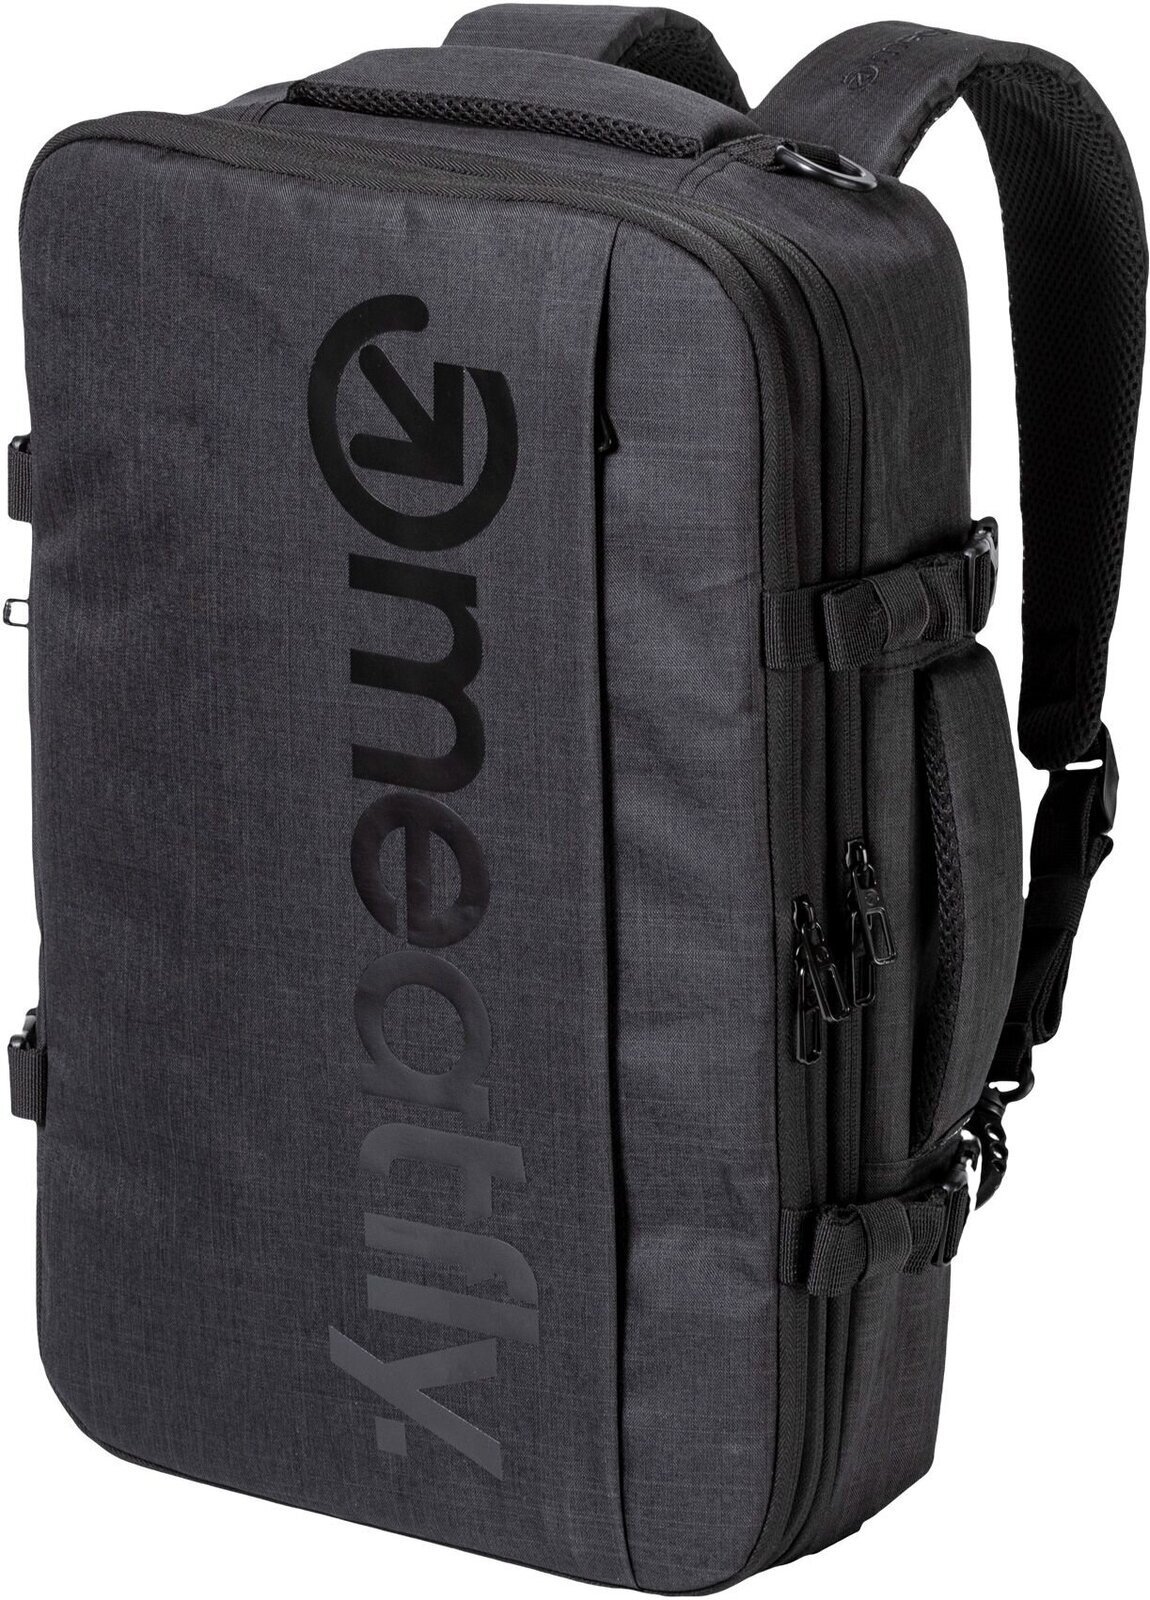 Lifestyle Backpack / Bag Meatfly Riley Backpack Charcoal Heather 28 L Backpack